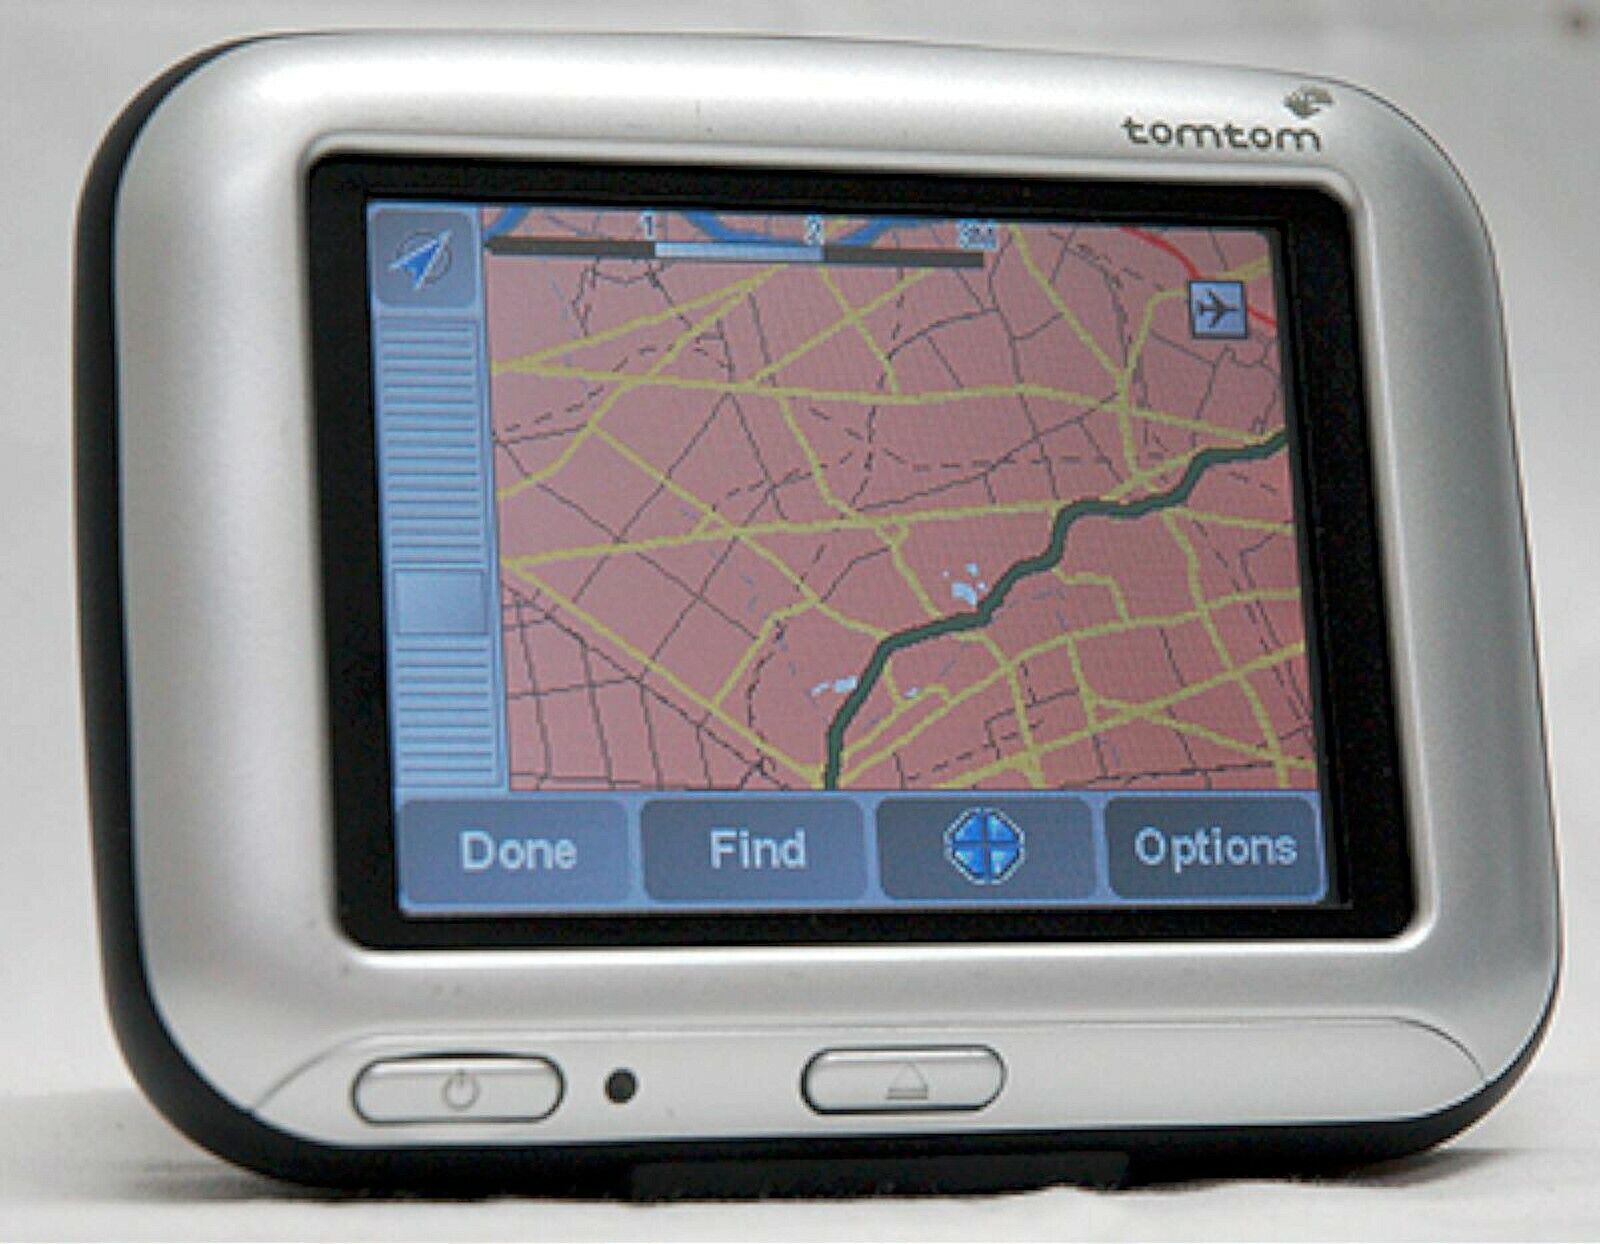 Primary image for TomTom GO 700 Car Portable GPS Navigator 3.5" LCD Screen Handheld unit USA Maps